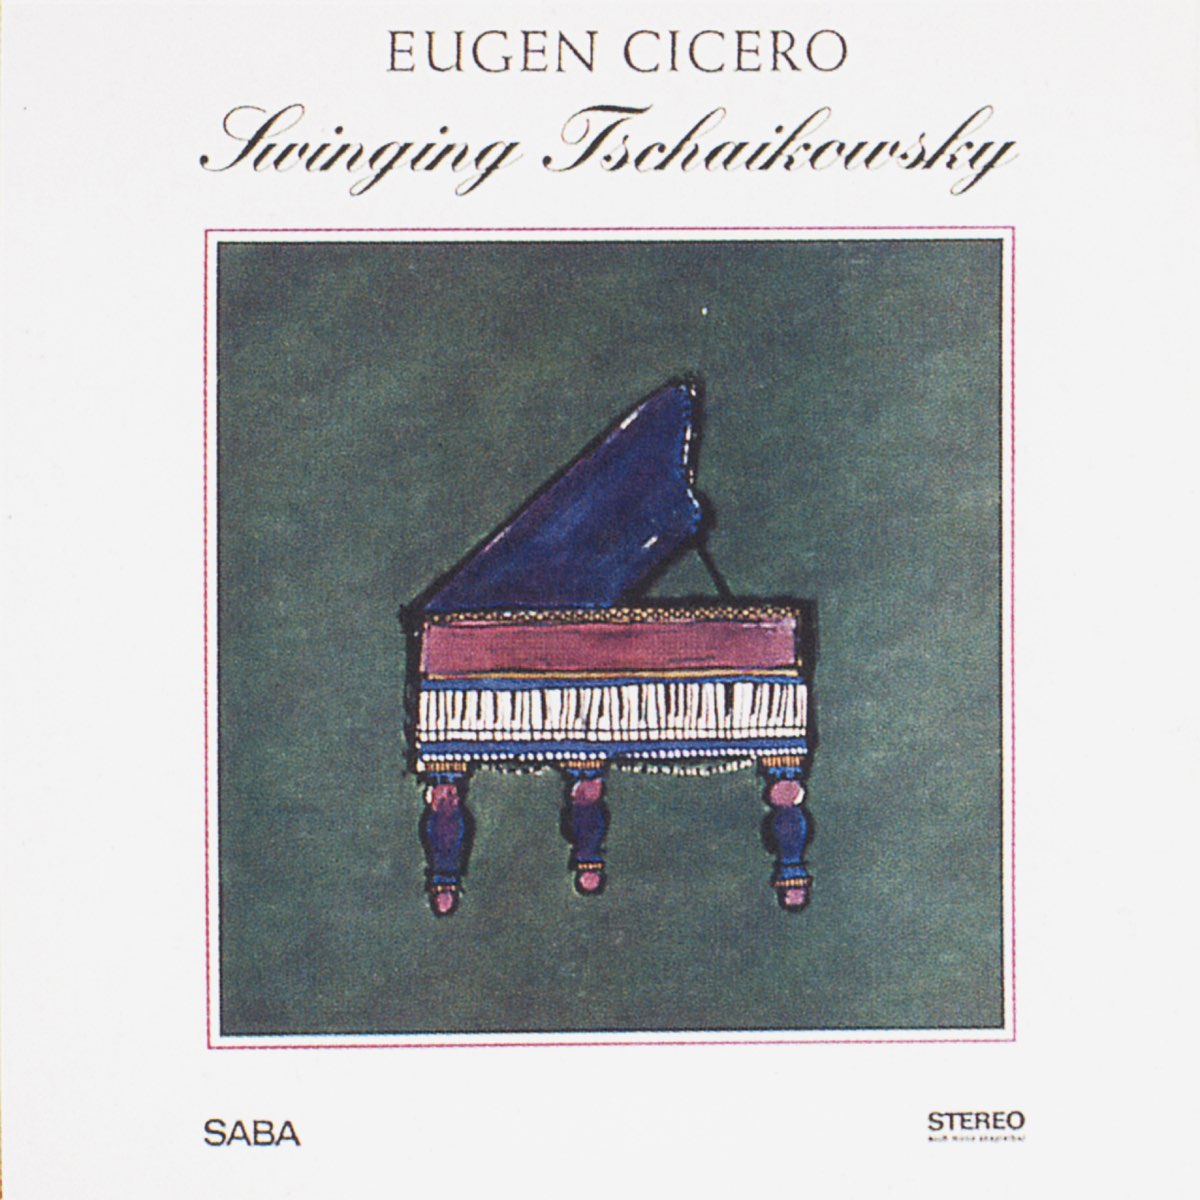 Swinging Tschaikowsky by Eugen Cicero on Apple Music